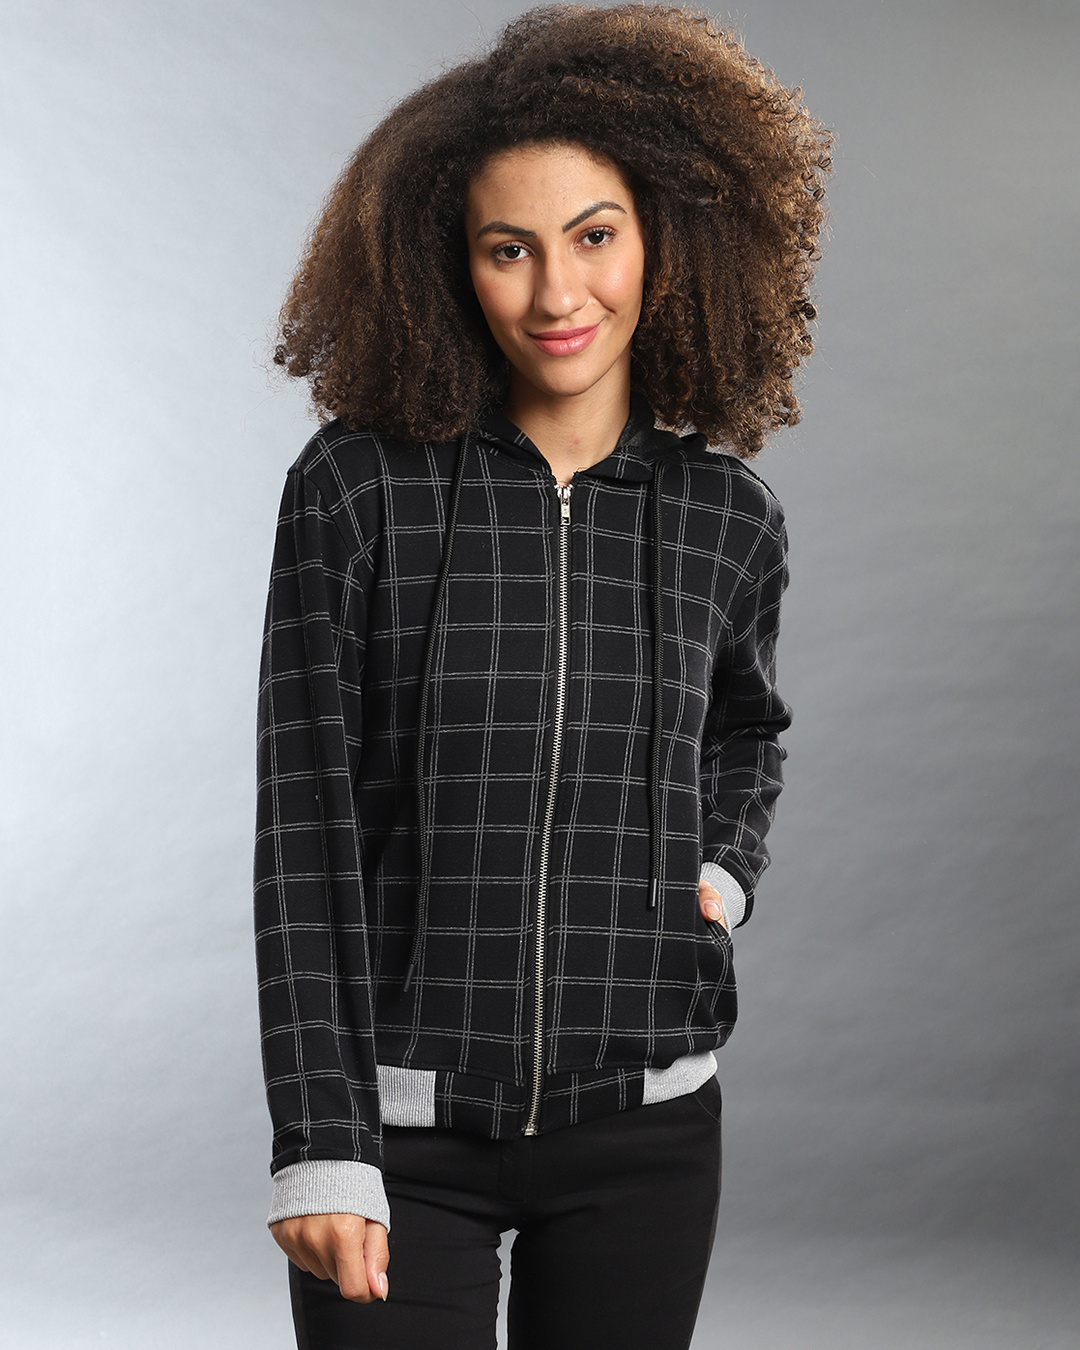 Buy Campus Sutra Women's Black Checkered Regular Fit Jackets Online at ...